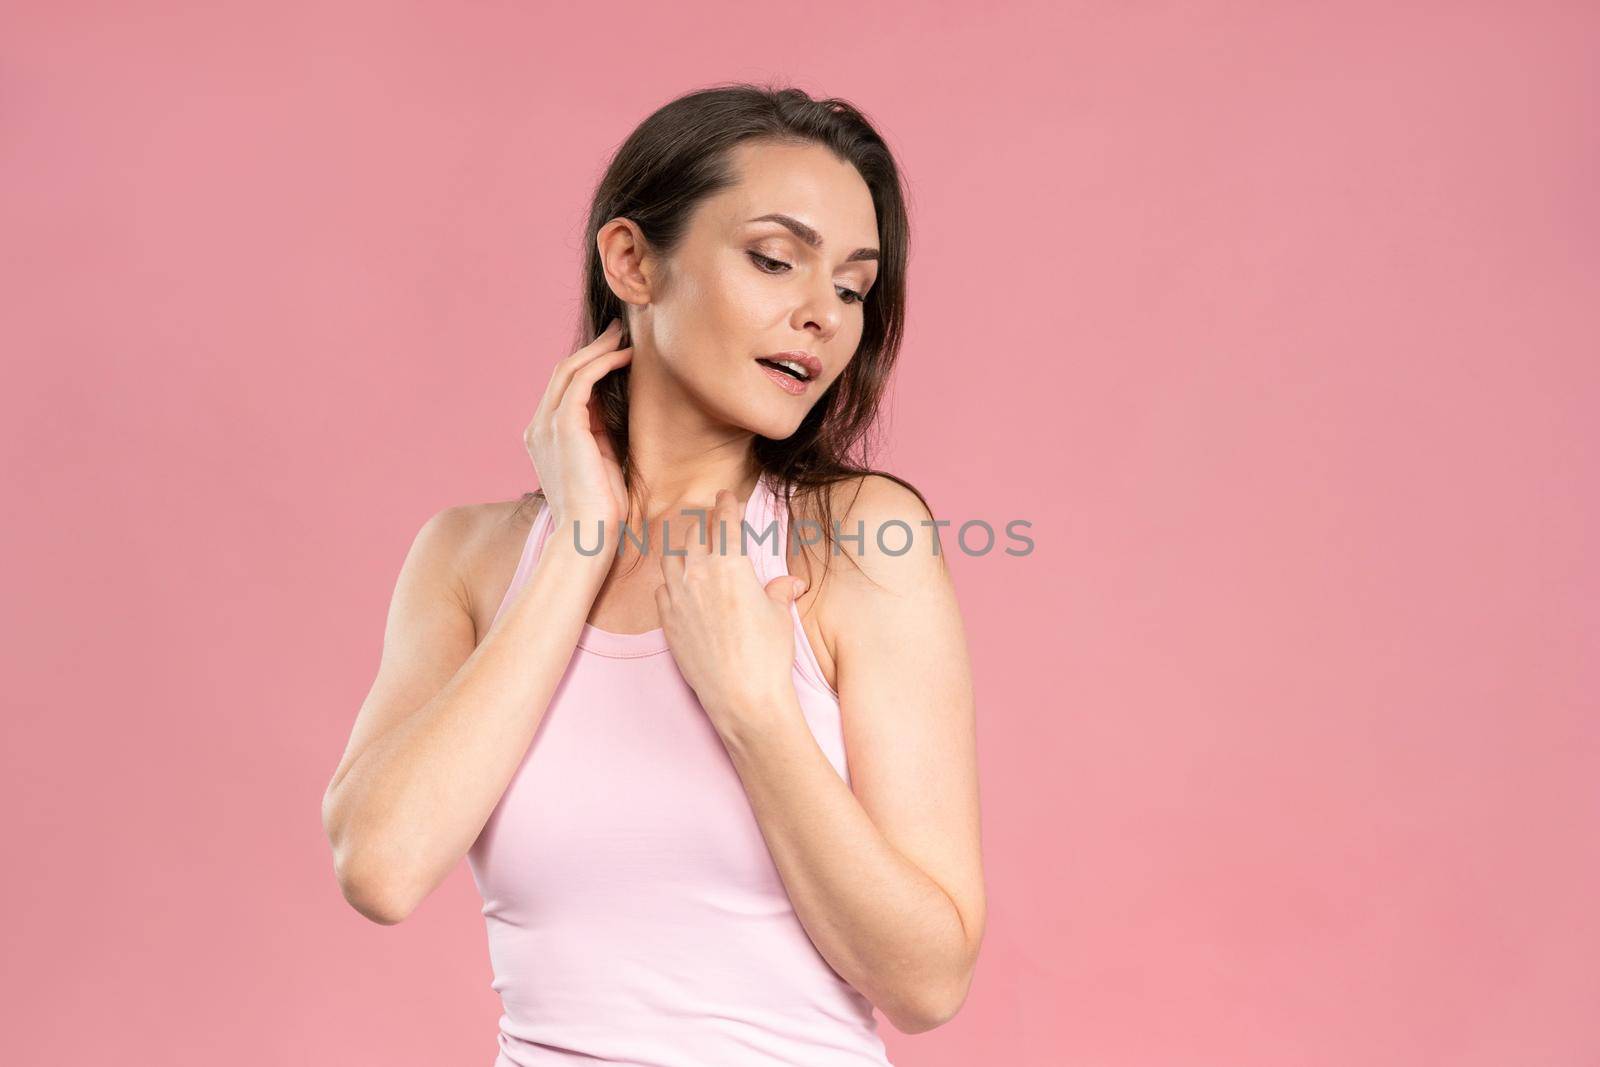 Portrait of a beautiful young female with no makeup, skin care concept, attractive brunette girl on pink background. Human emotions, facial expression concept. Facial expressions, emotions, feelings.